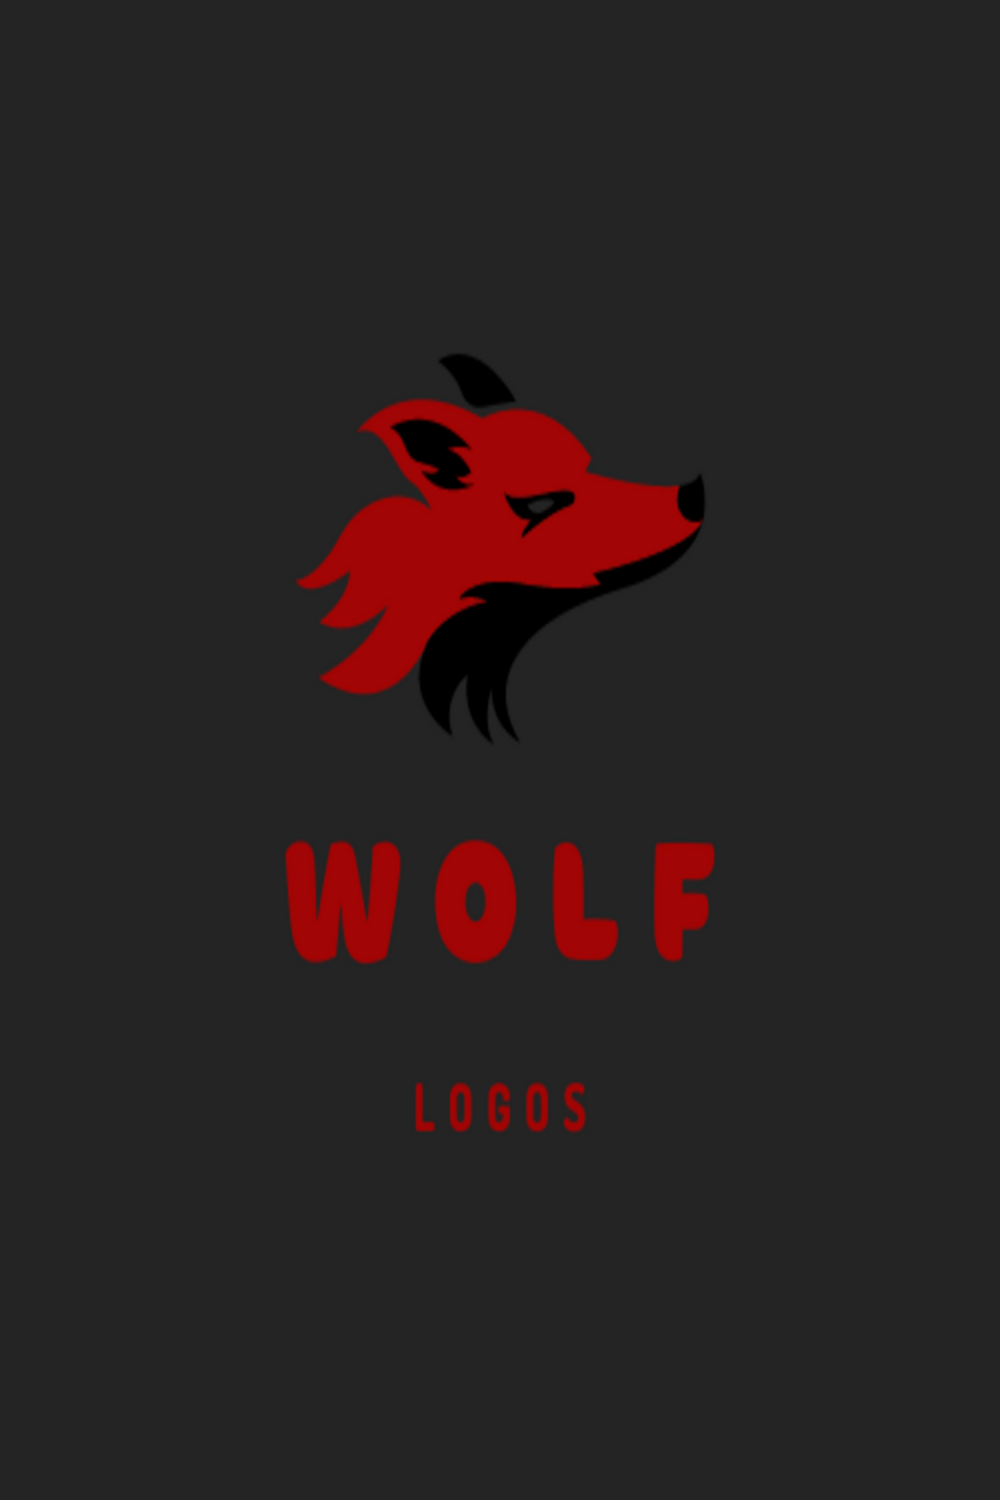 Cool Wolf logo in 3 colors : Red, Blue, Green and the text can be edited later to write what you want pinterest preview image.